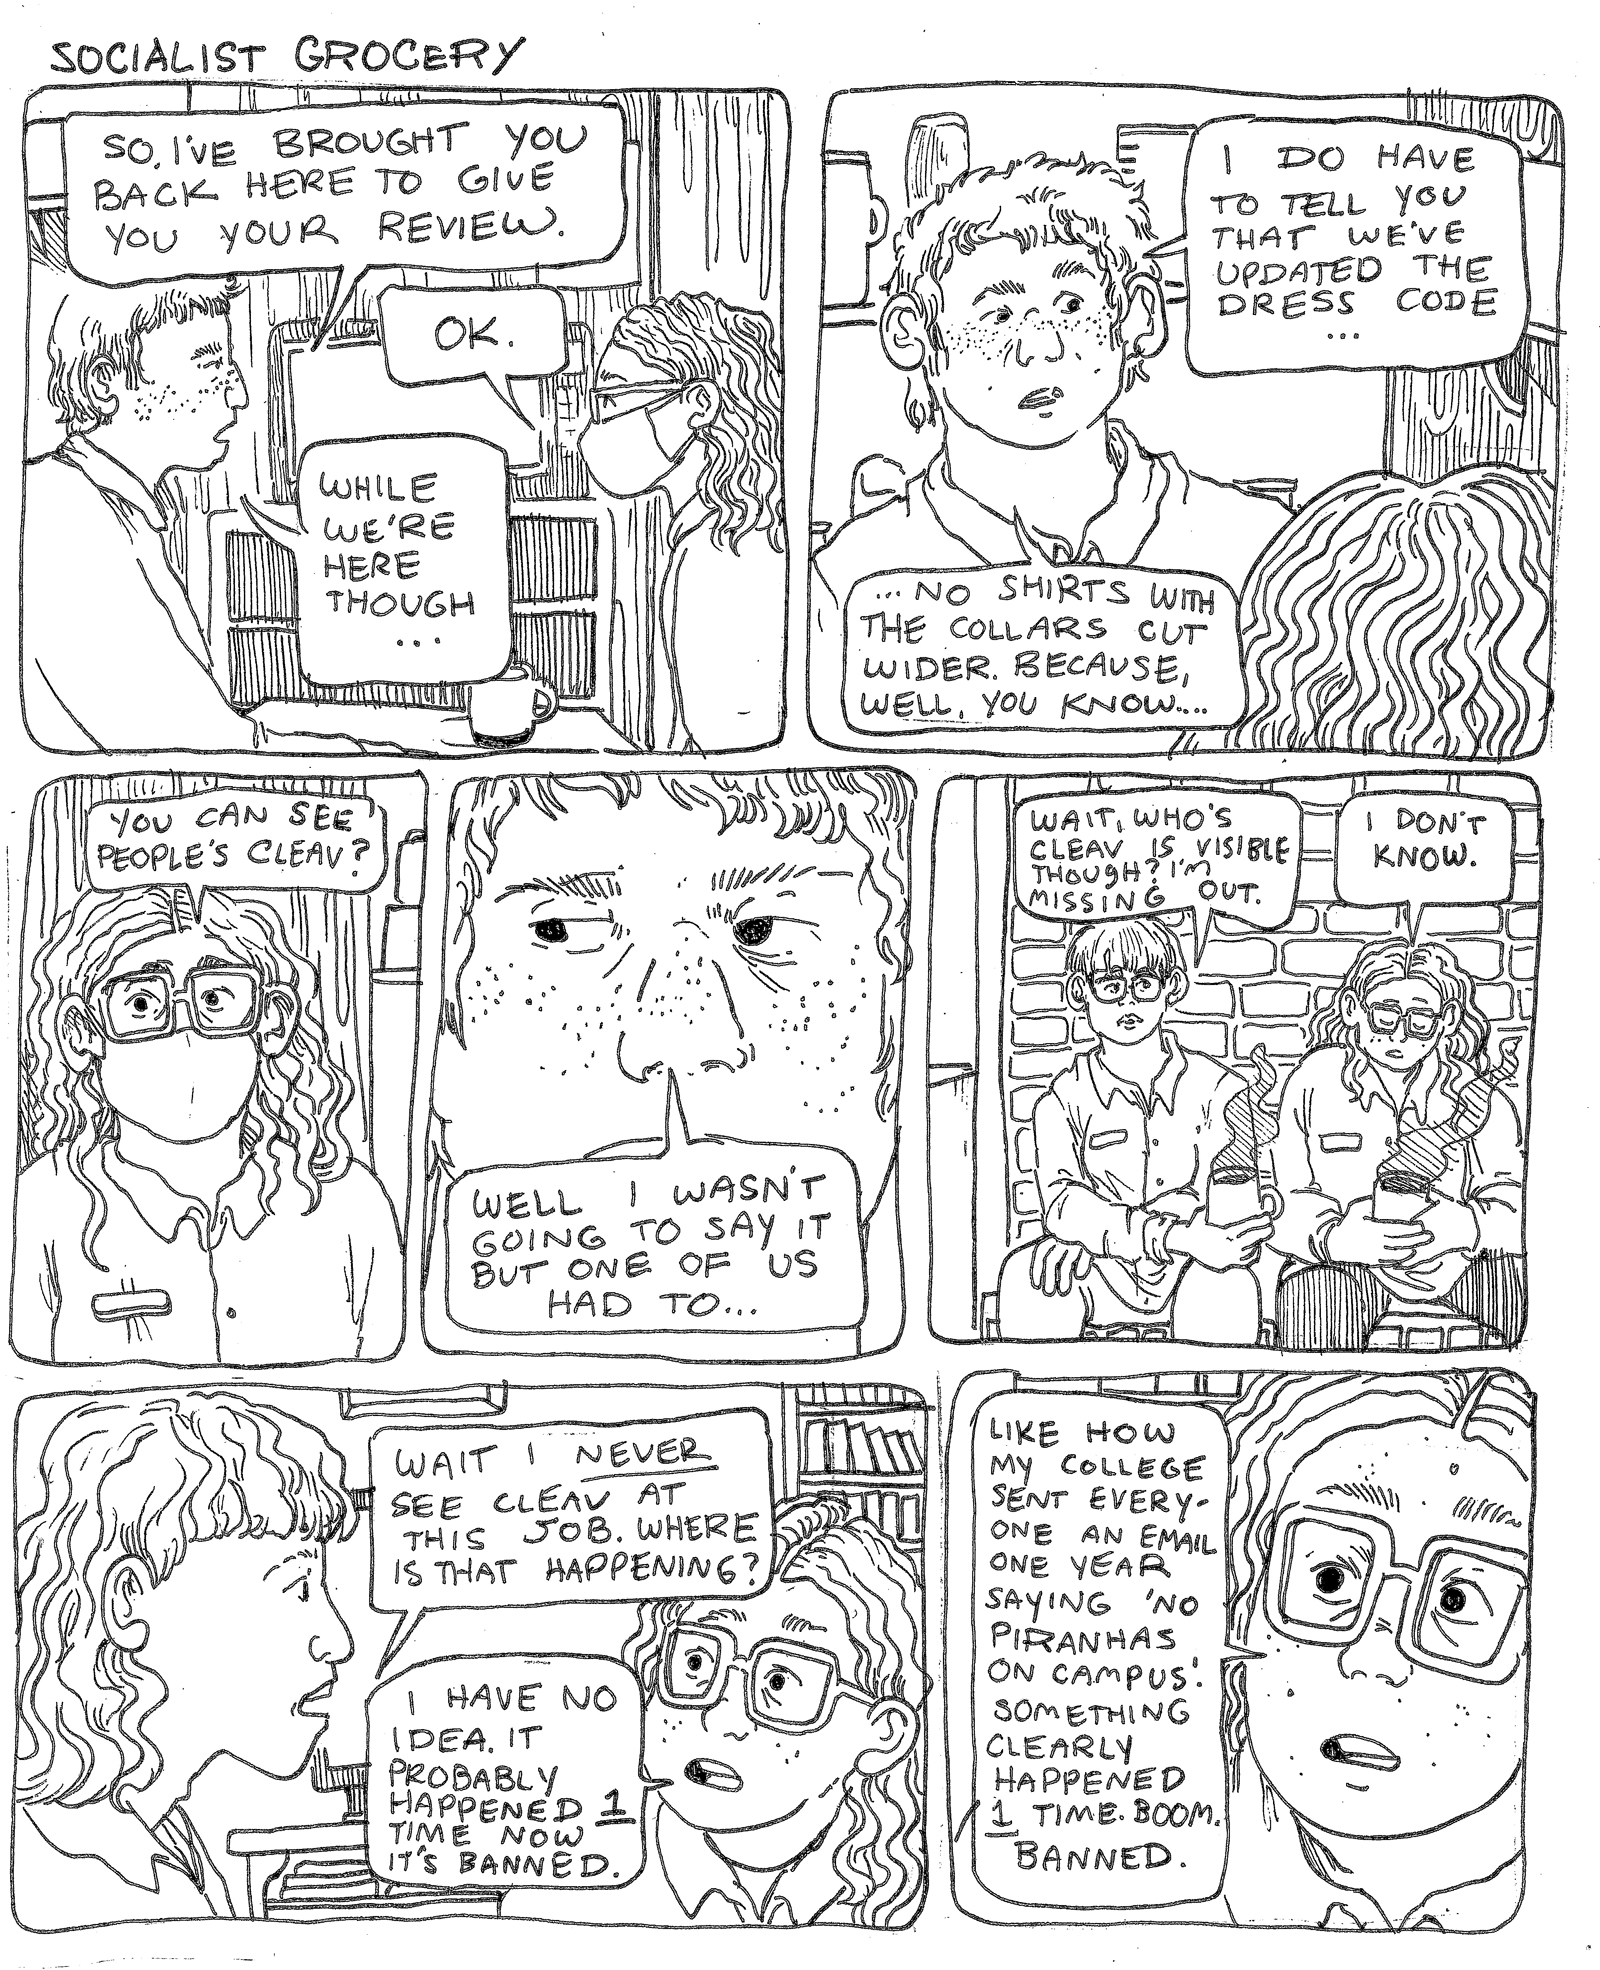 A large 7-panel black and white comic from the series "Socialist Grocery," in which Sebastian learns about a new dress code policy at their employee review and discusses it with their coworkers.